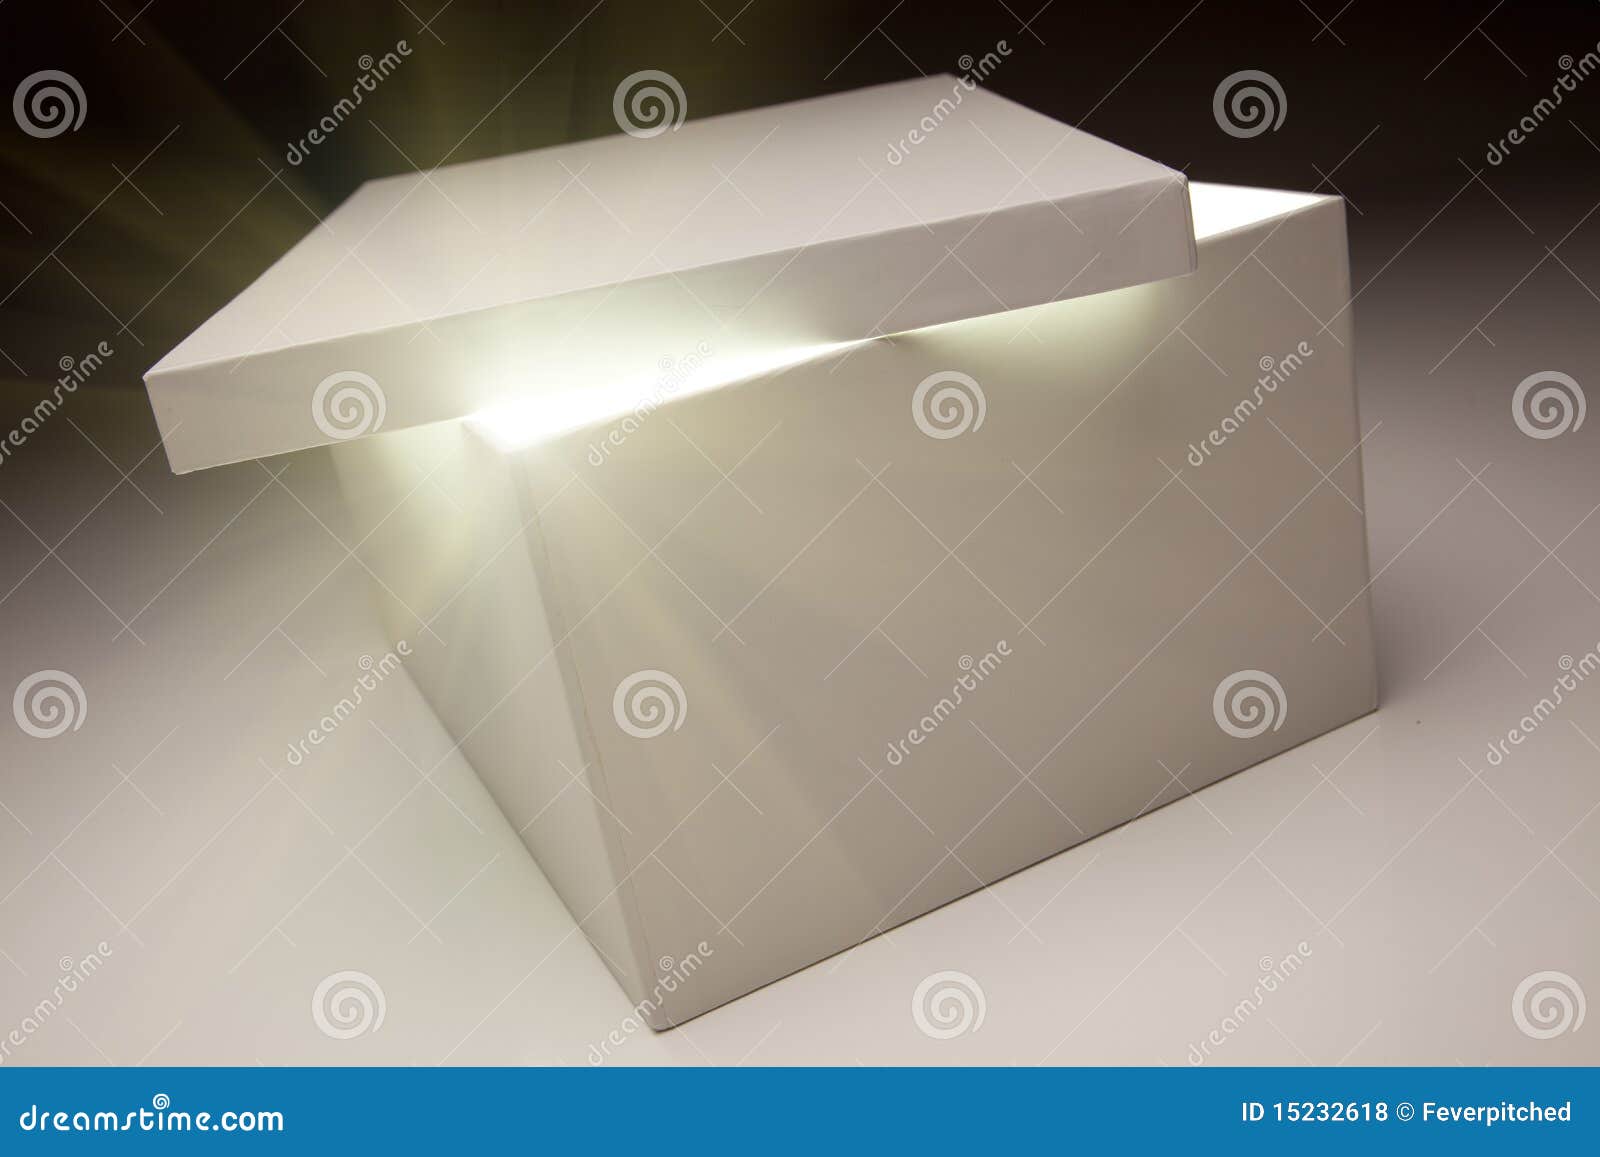 white box with lid revealing something very bright